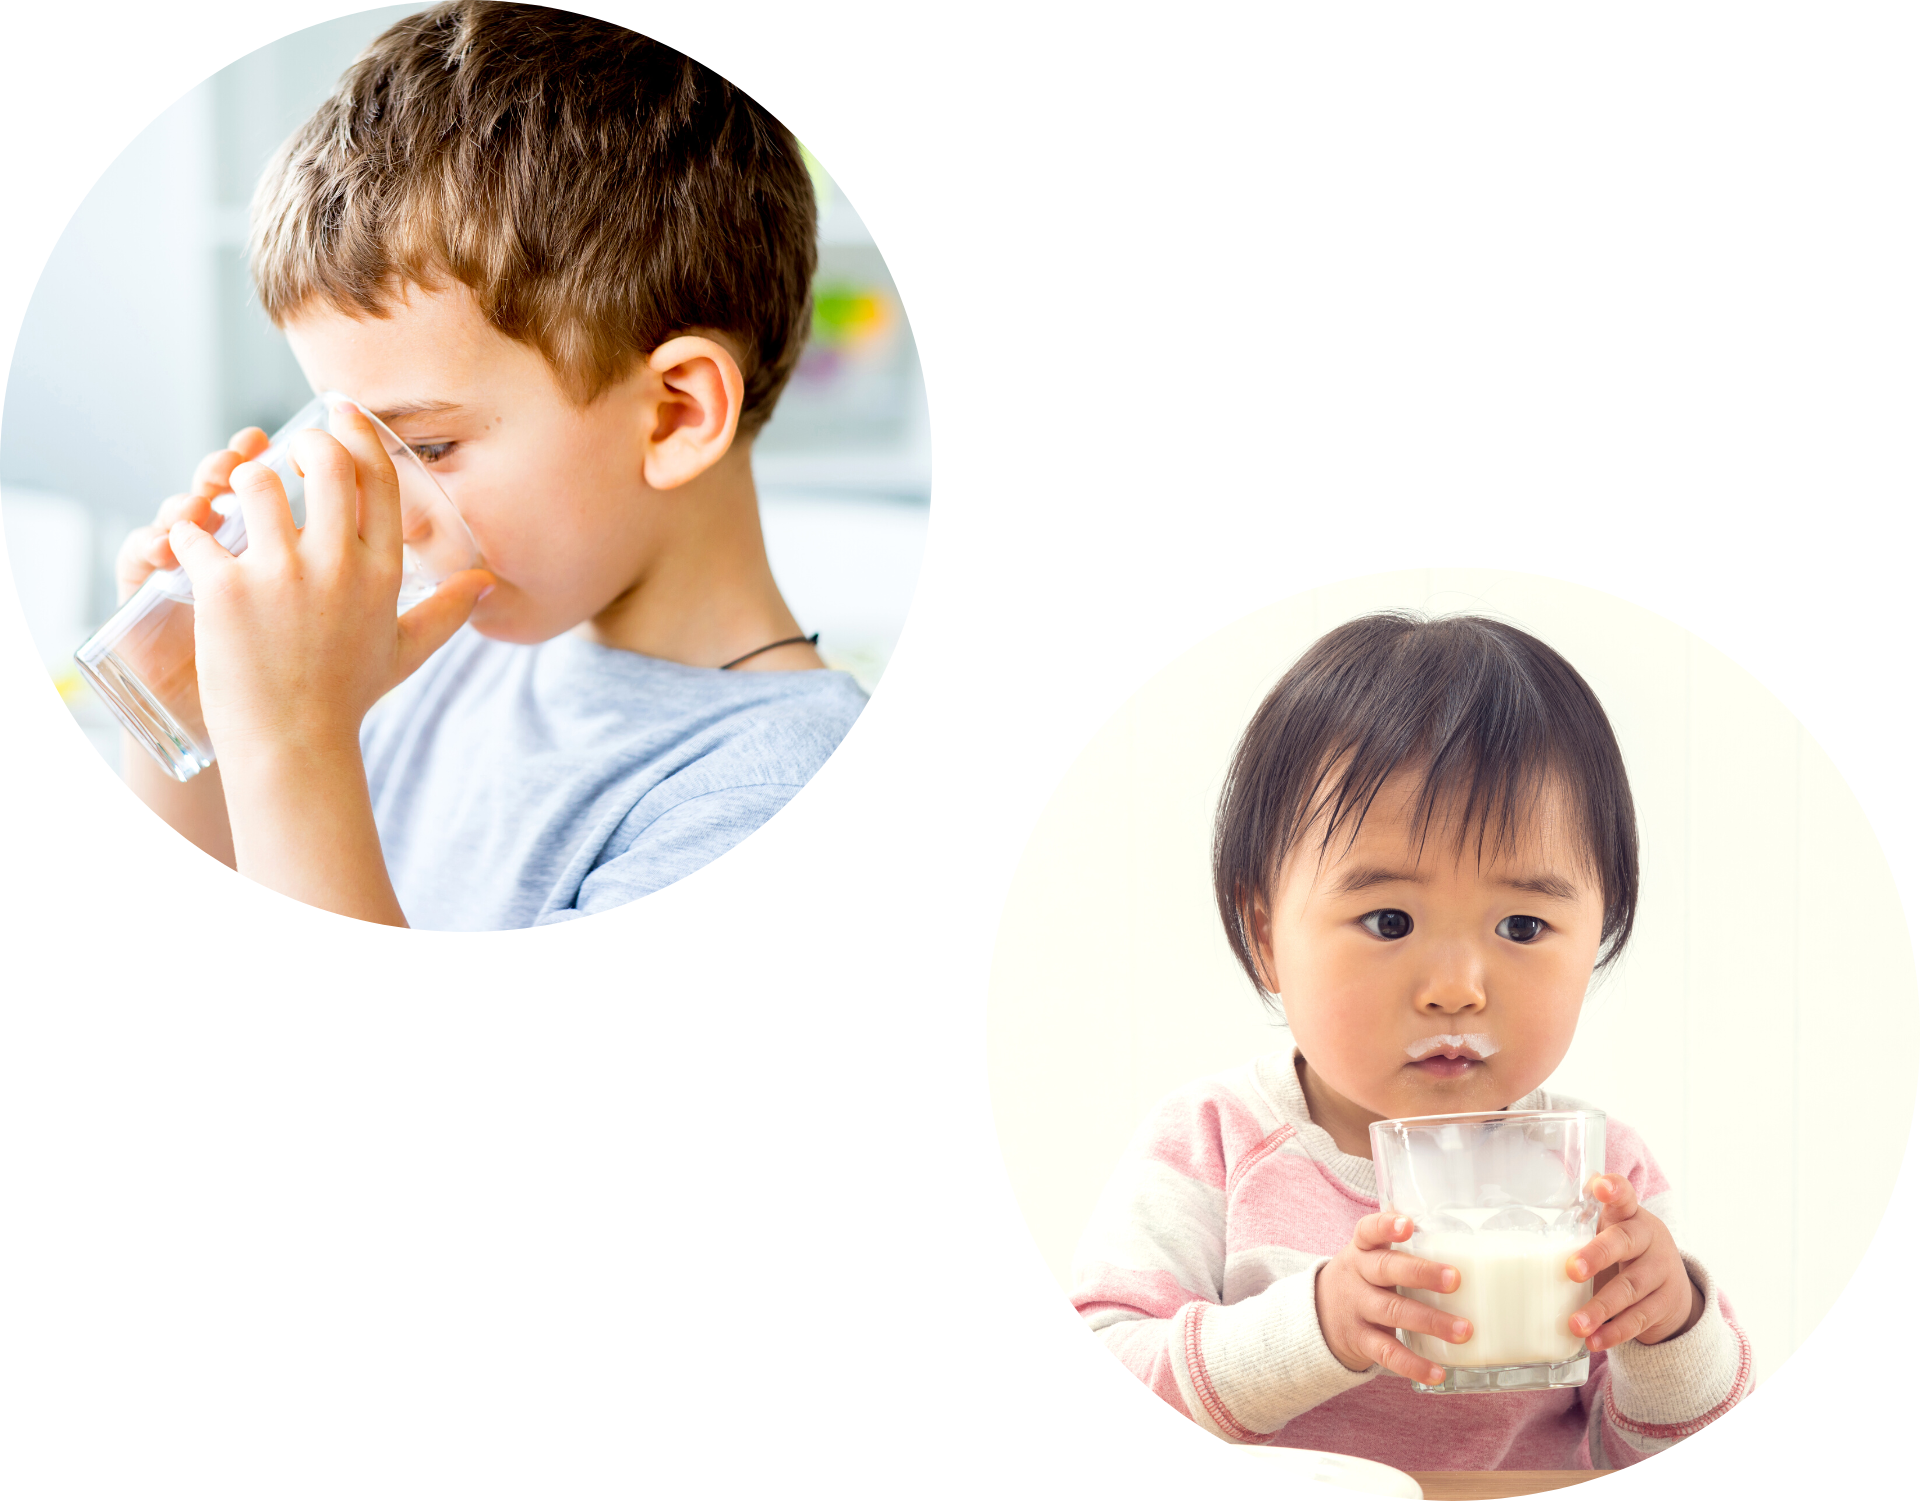 Two circular image of a young boy drinking water and a young girl holding a glass of milk, having a milk moustache around her mouth in childcare